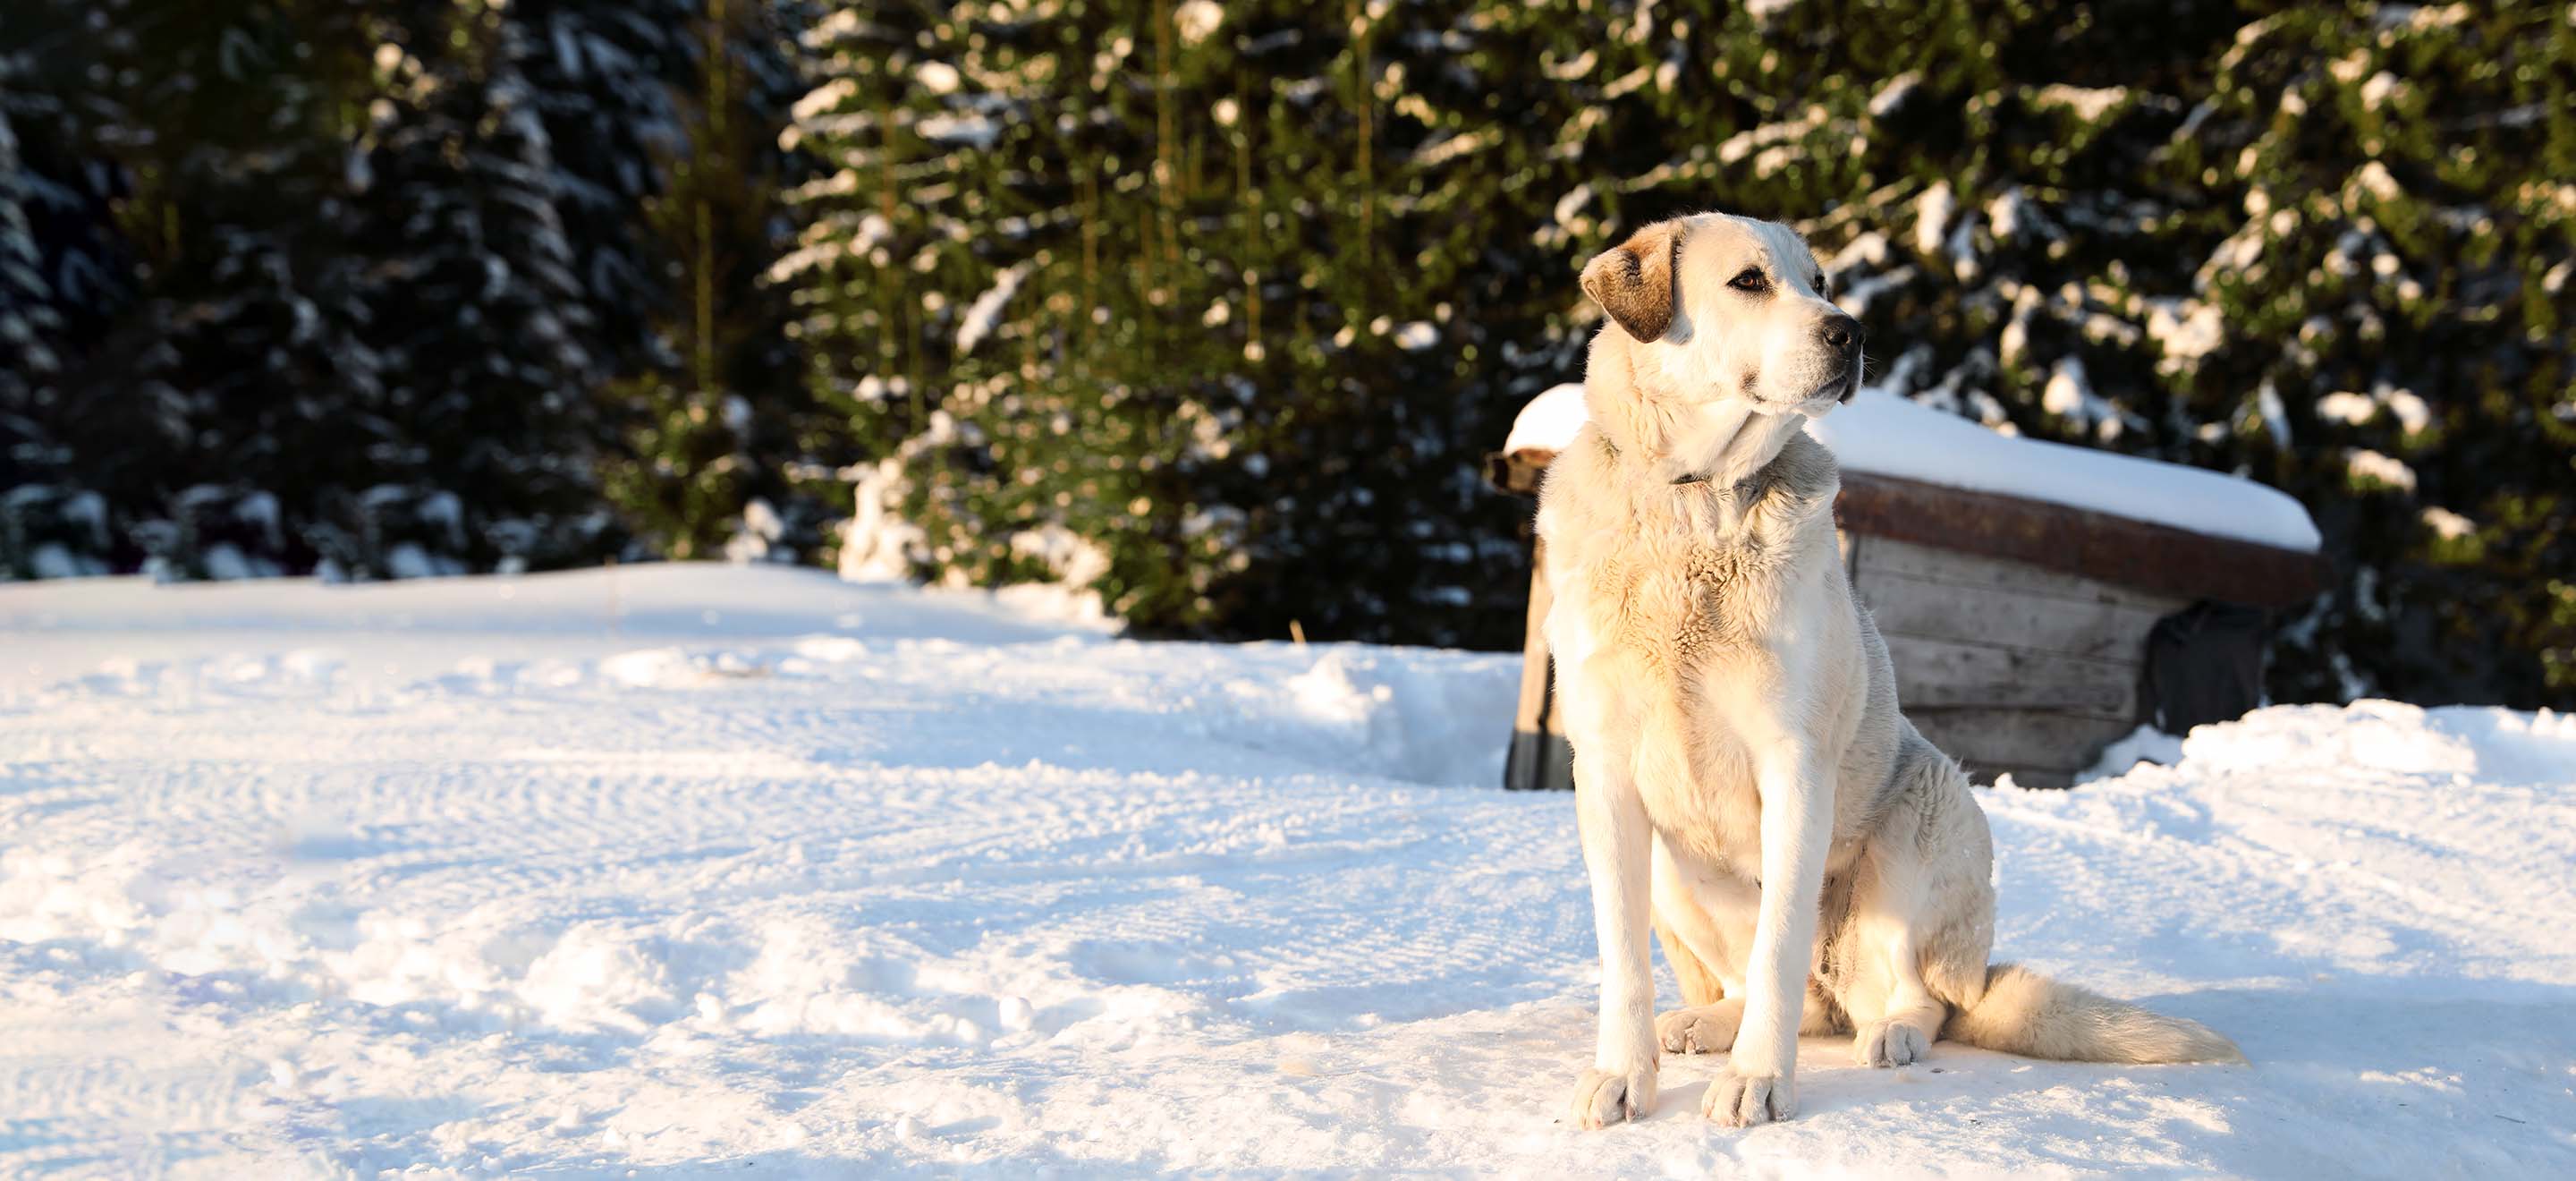 White Akbash dog standing in a snow covered field image